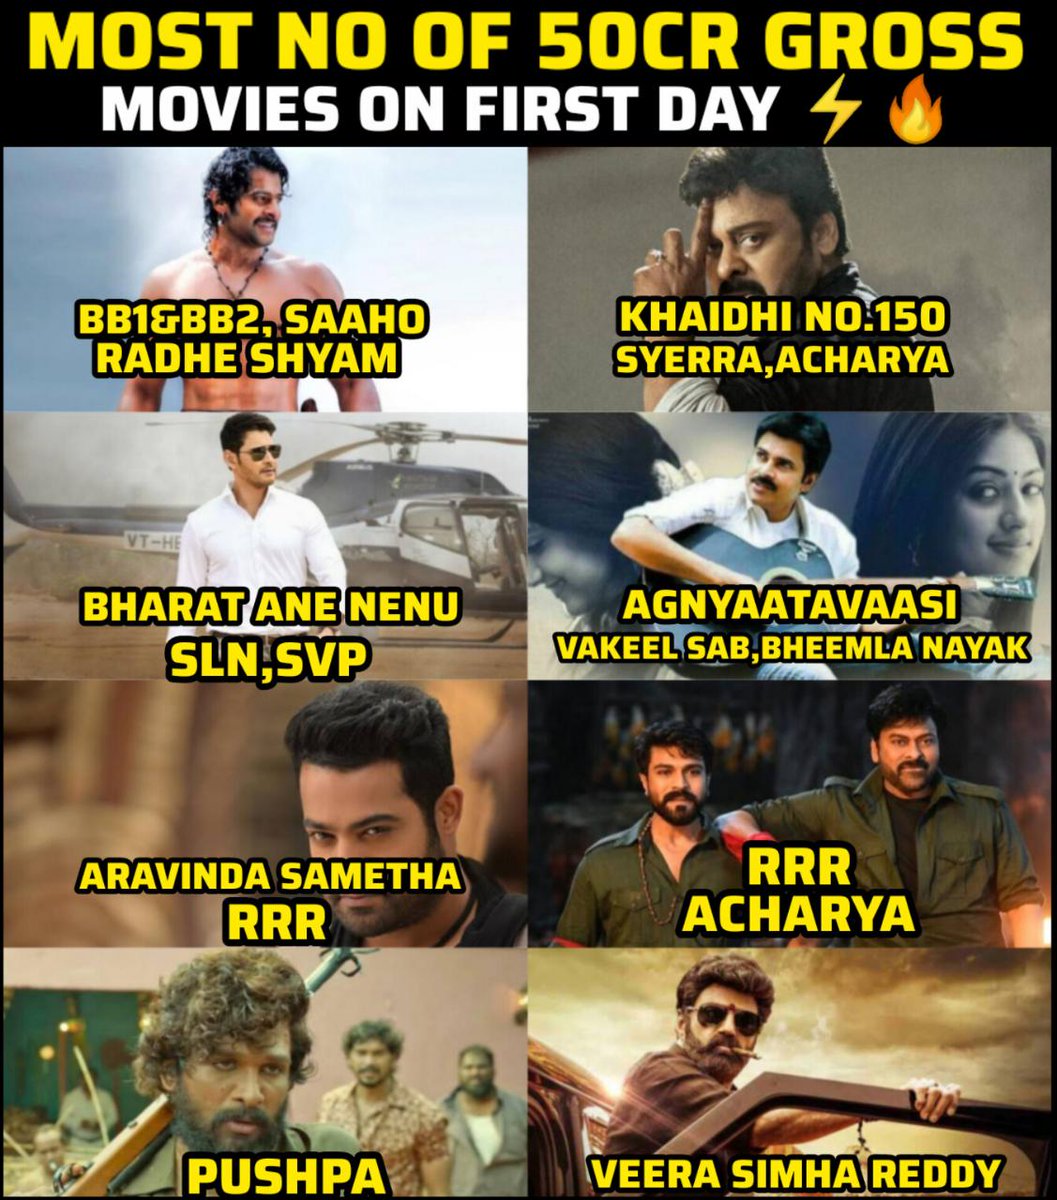 Mee Fav 👇🏻💥..

Follow us on Twitter For More interesting Posts and Sub to our channel For More interesting Videos..

#Firstday50crgrossmovies #Firstdaysensations #Bahubali #Syeraa #Bharatanenenu #Vakeelsaab #RRR #Pushpa #Veerasimhareddy #Cinematicworld